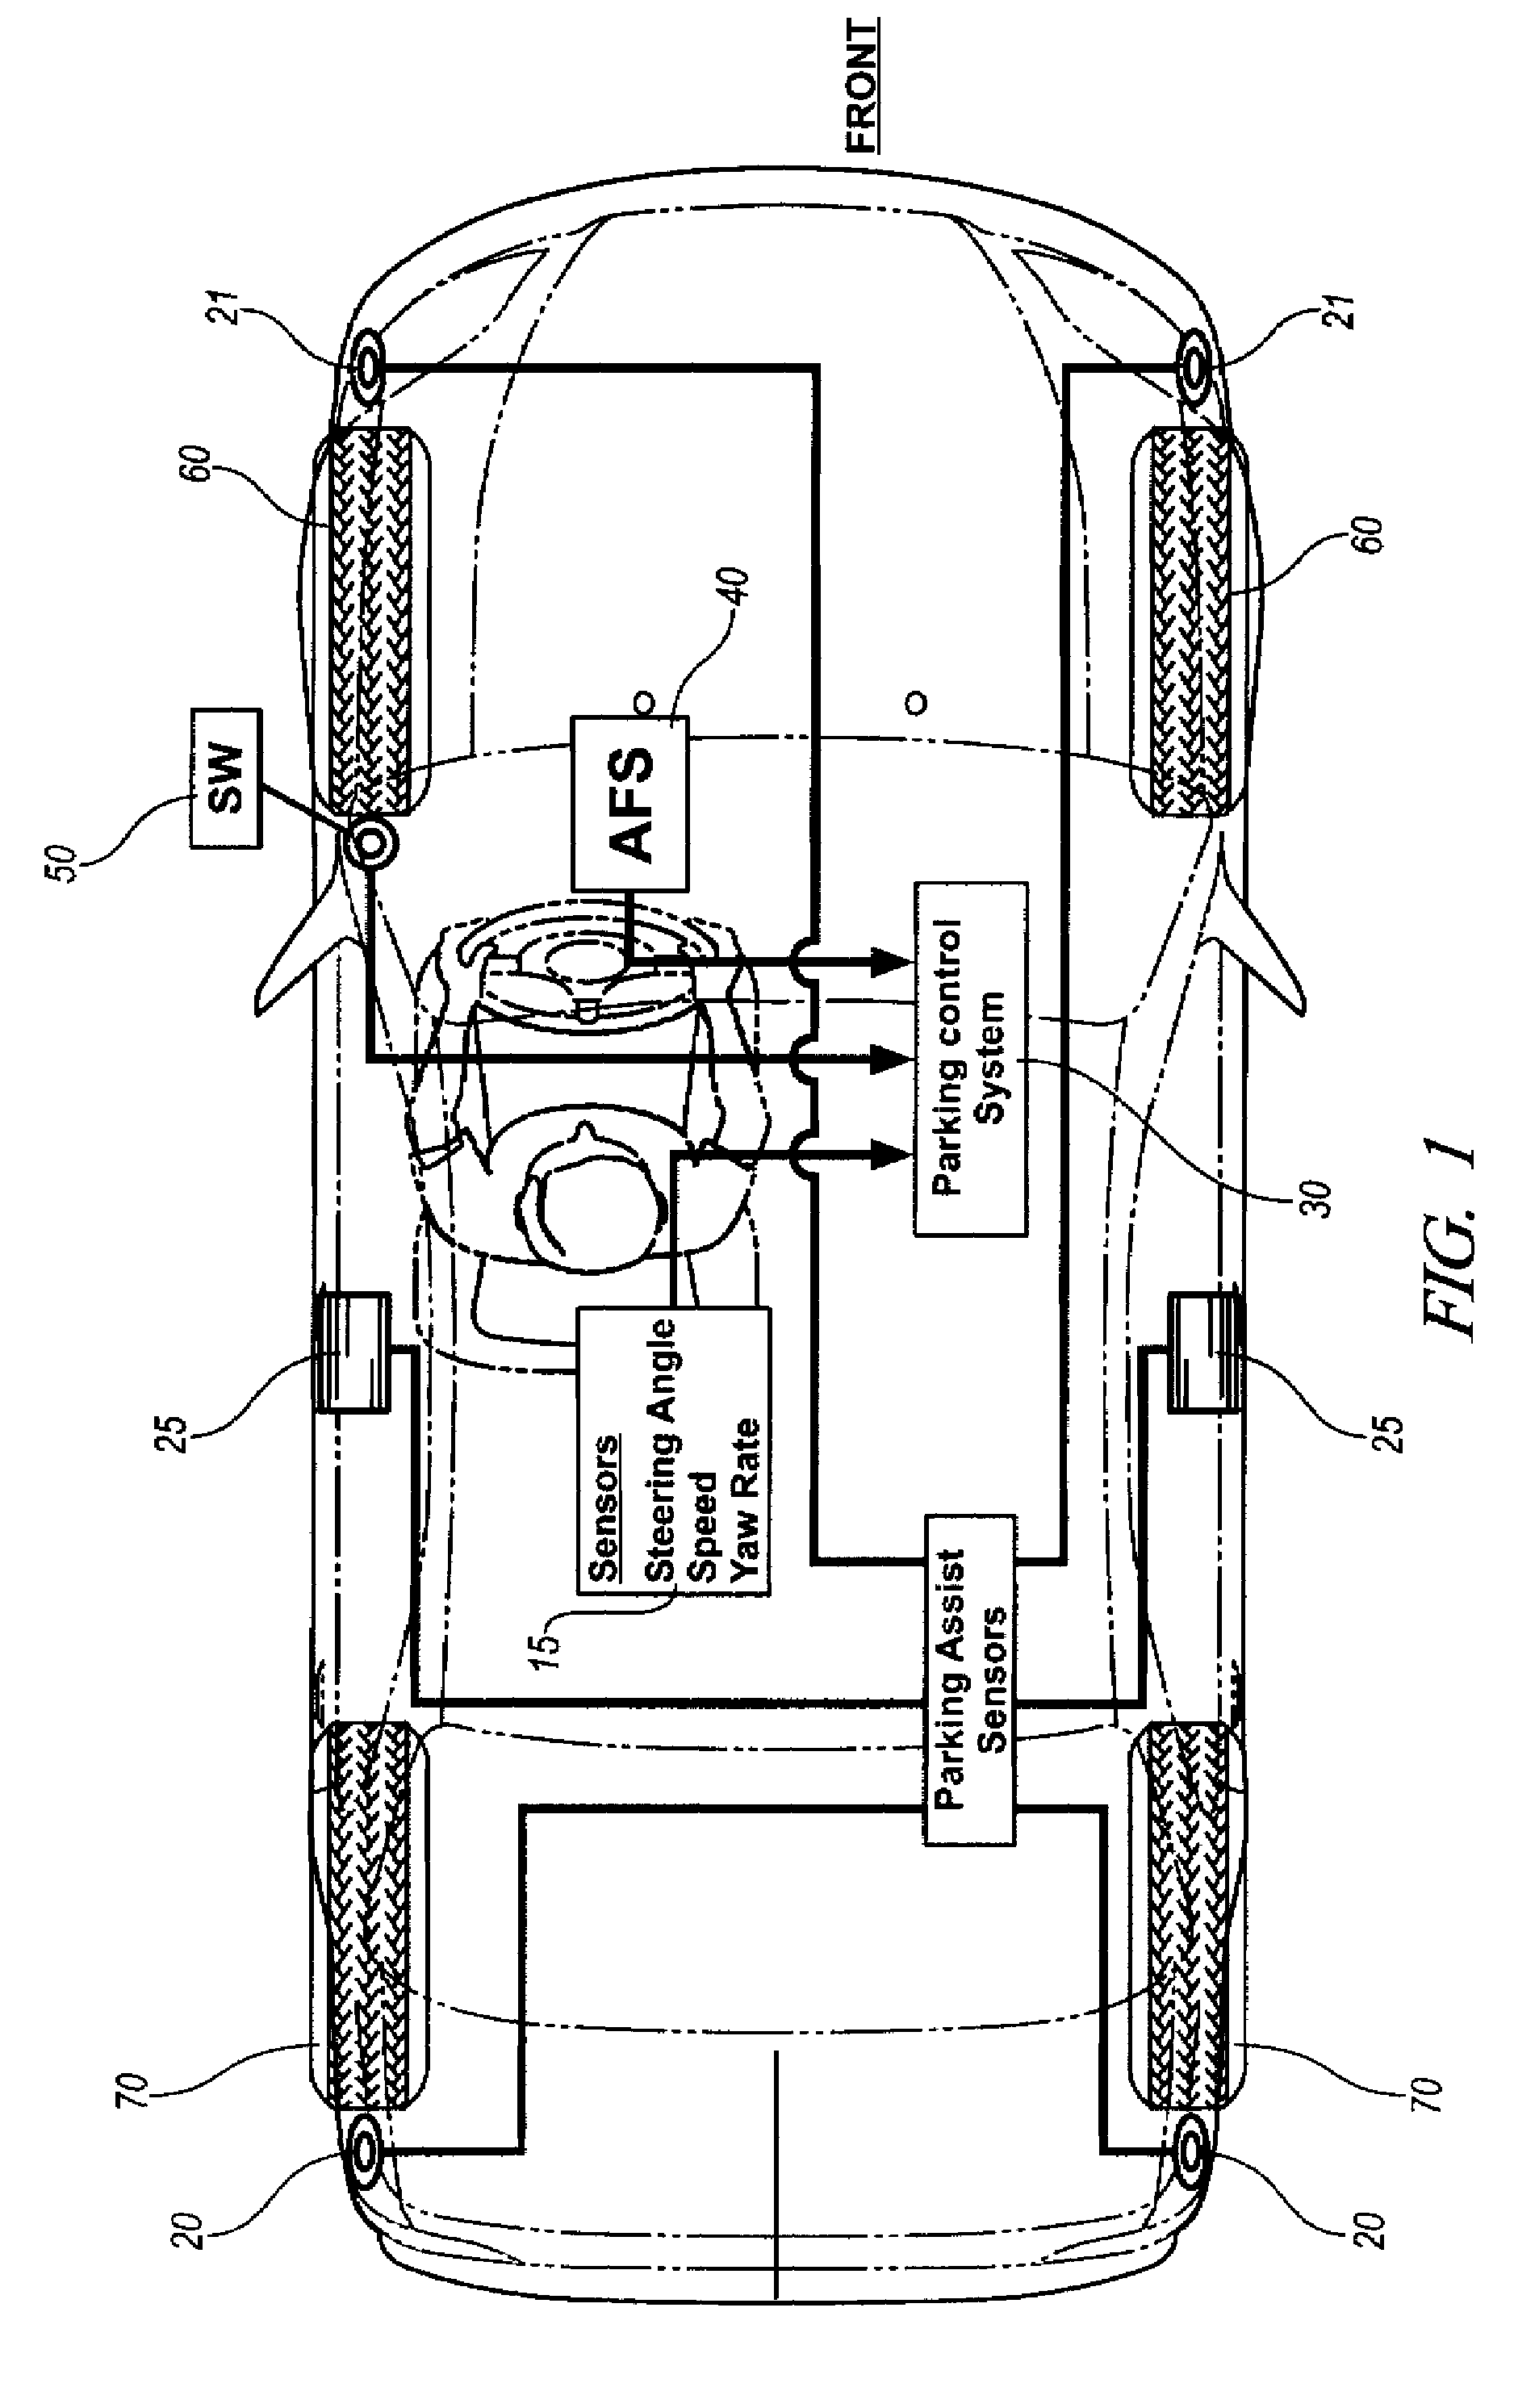 Method and system for vehicle parking assistance